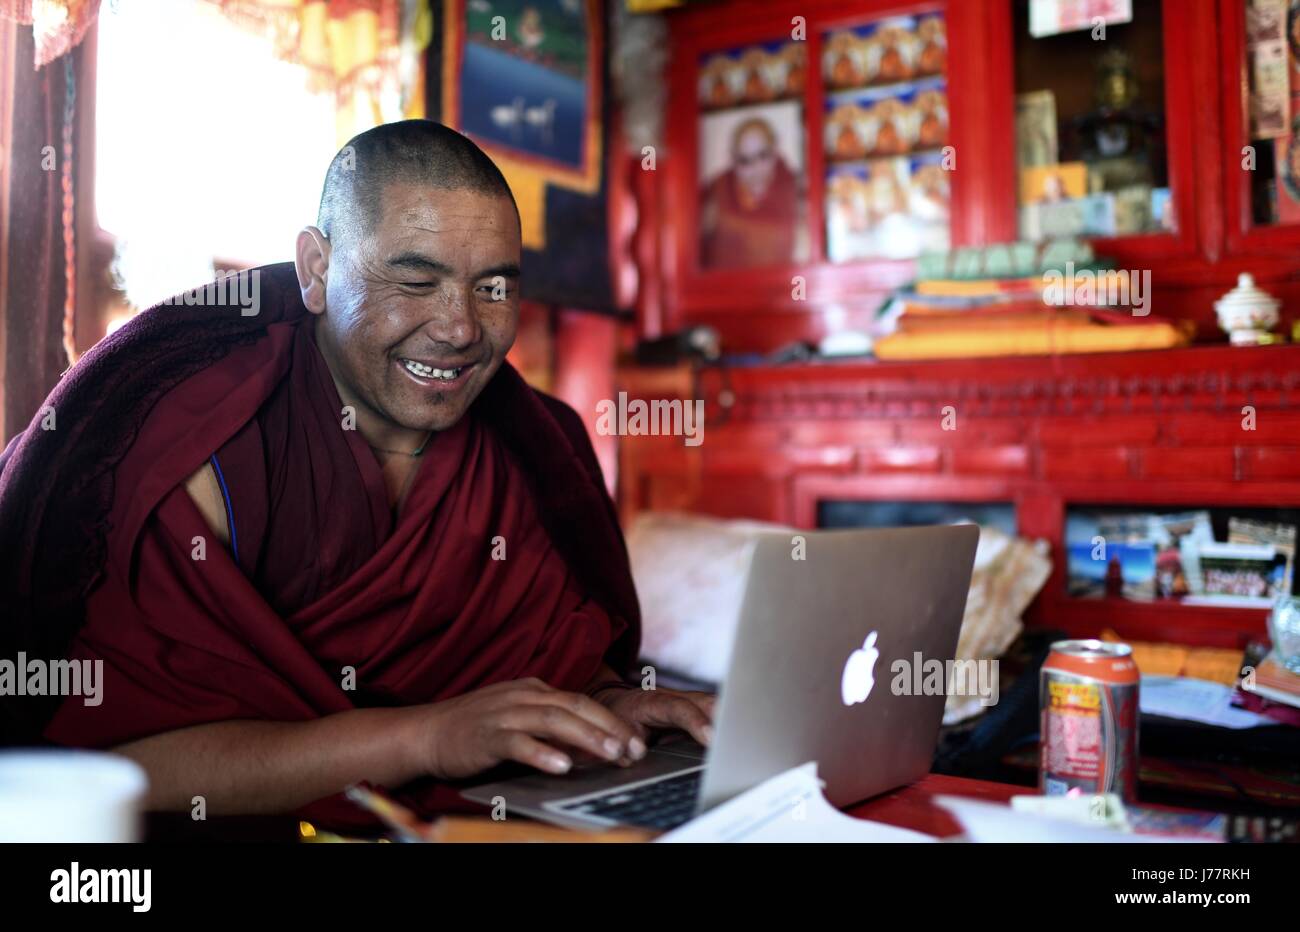 (170524) -- LHASA, May 24, 2017 (Xinhua) -- Lama Ngawang Peljor practices typing at the Rongpu Monastery near Mount Qomolangma in southwest China's Tibet Autonomous Region, May 17, 2017. Rongpu Monastery, the world's highest monastery at the altitude of over 5,000 meters, located at the foot of Mount Qomolangma in Tingri County. The 36-year-old Ngawang Peljor has practiced Buddhism in the monastery for 15 years. He lives a simple and regular monastic life here. Getting up at 8:30 a.m., he chants after breakfast till noon. He keeps chanting till 4 p.m. after one-hour break for lunch. After dinn Stock Photo